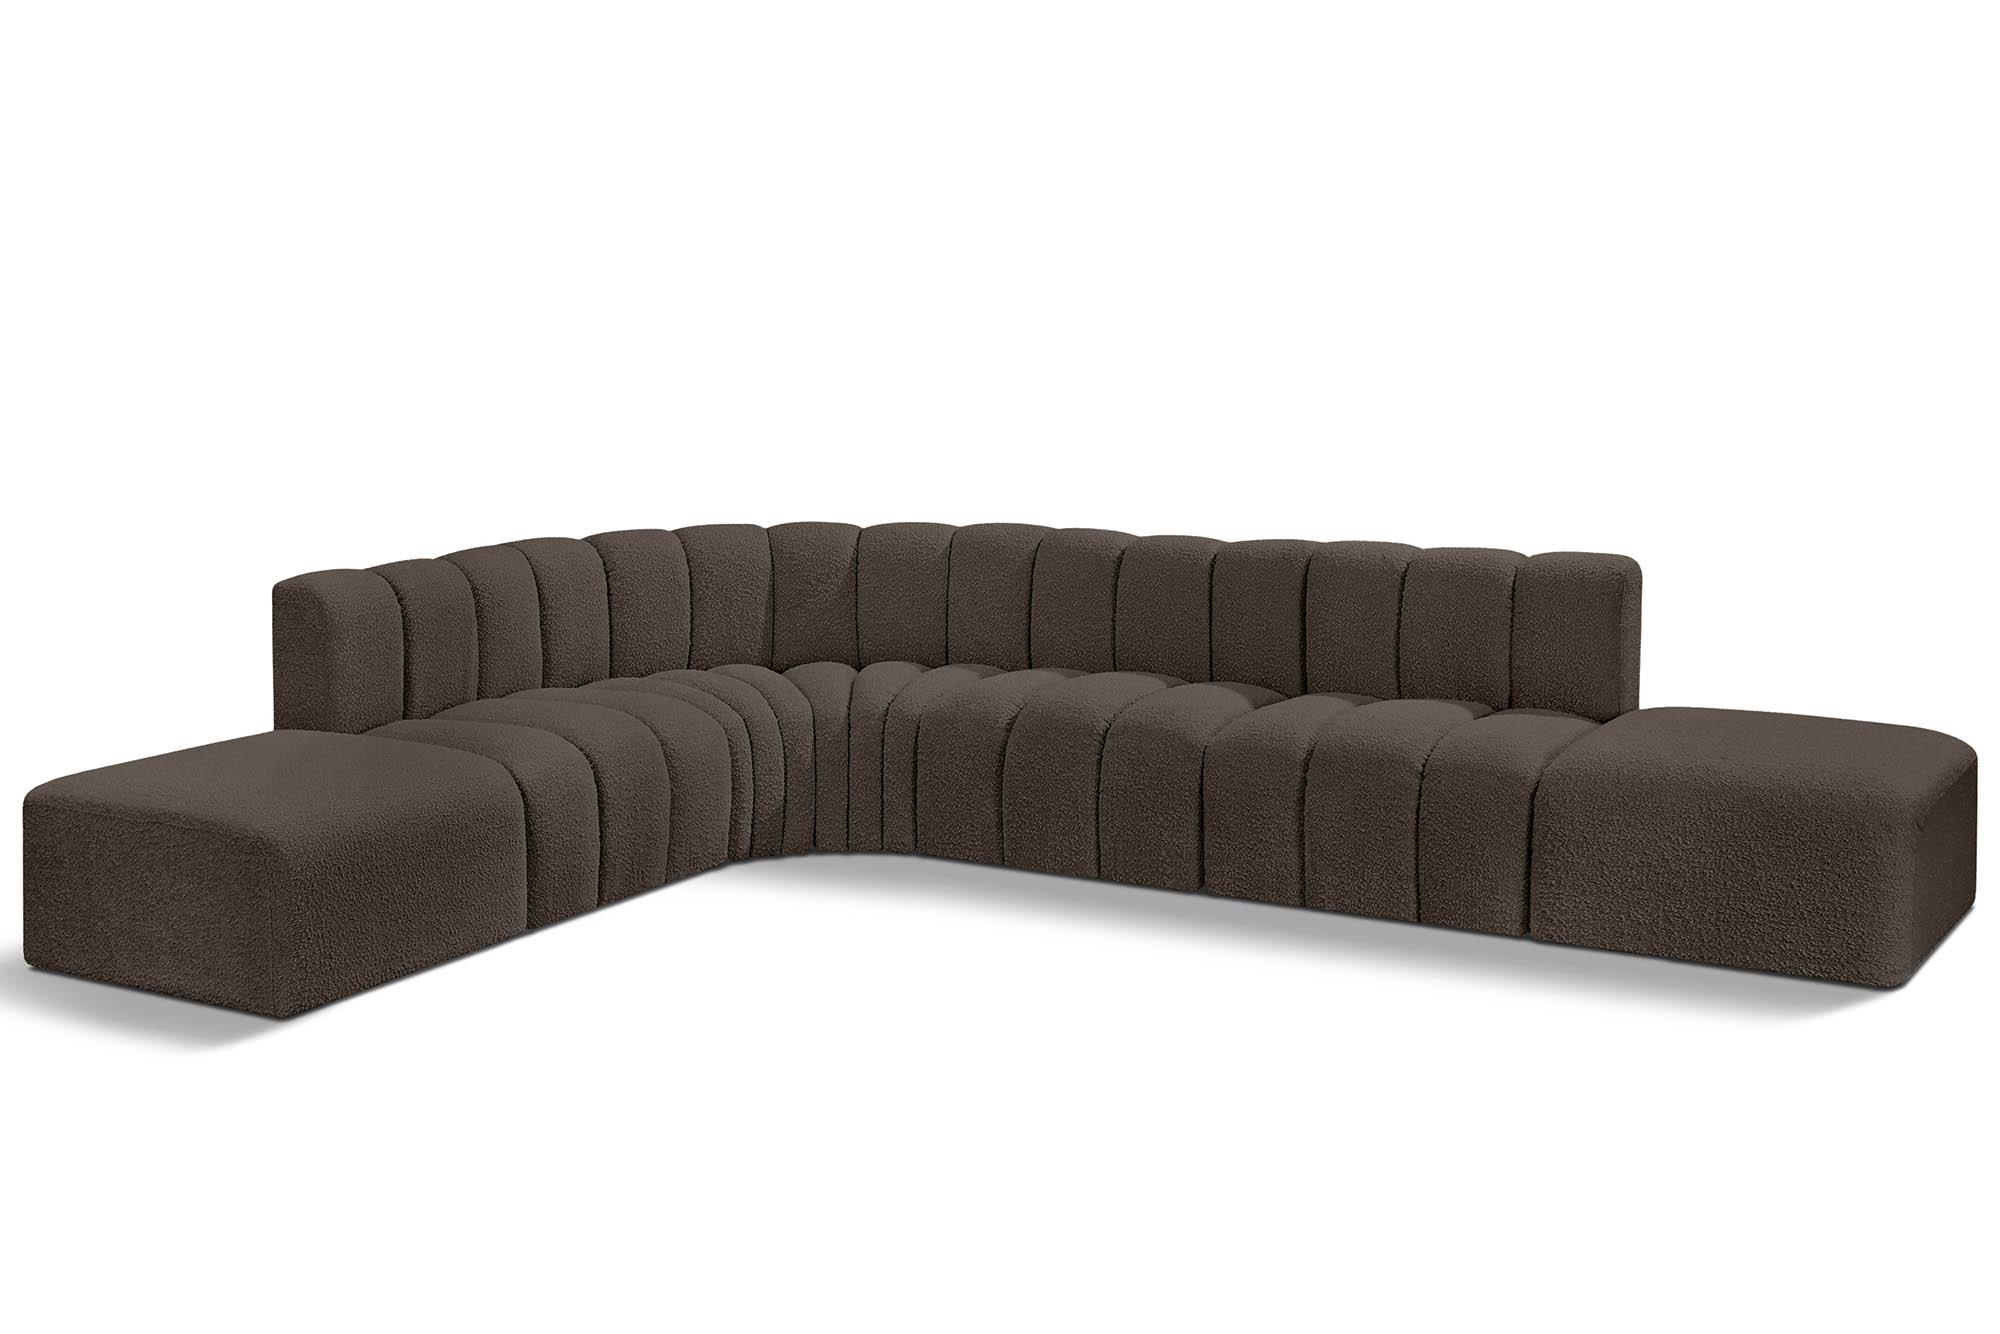 Contemporary, Modern Modular Sectional Sofa ARC 102Brown-S7A 102Brown-S7A in Brown 